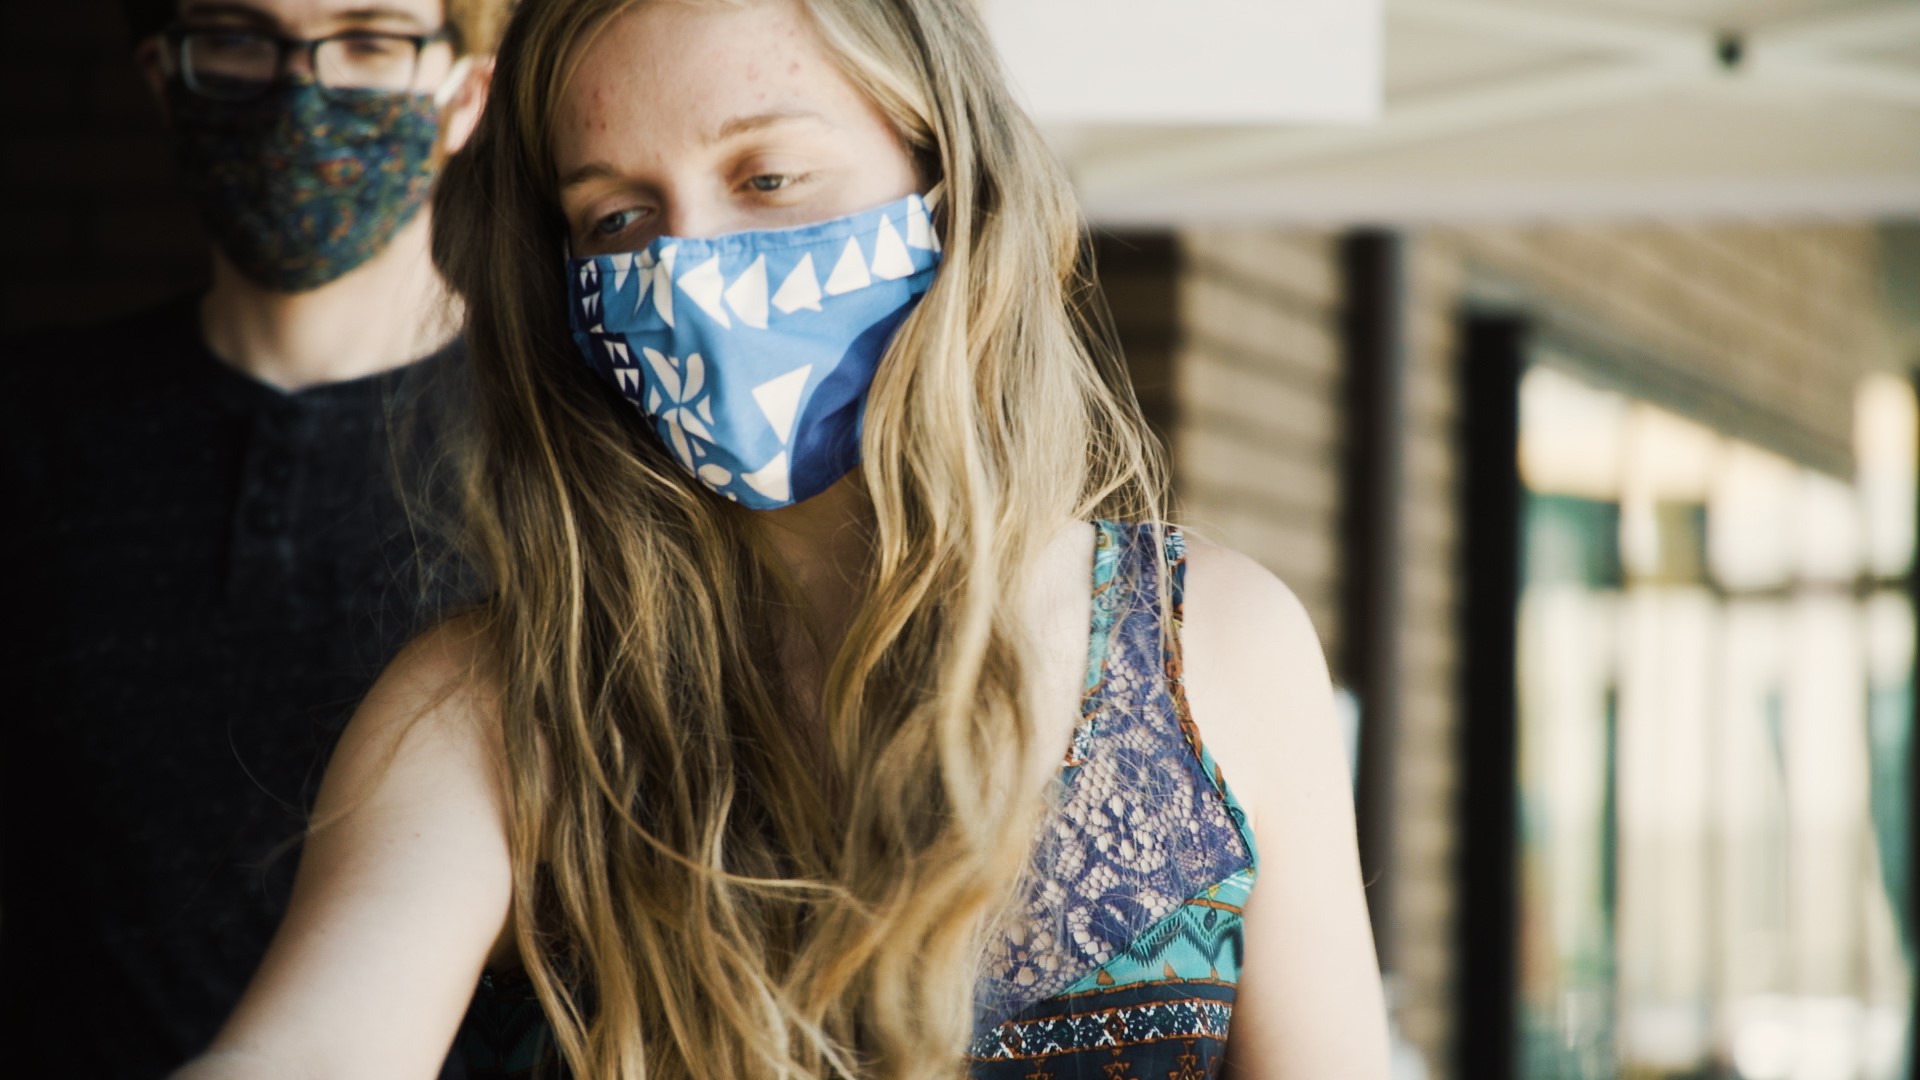 Gov. Newsom made it mandatory for all Californians to wear a mask while in public but many are still against wearing a face-covering amid the coronavirus pandemic.